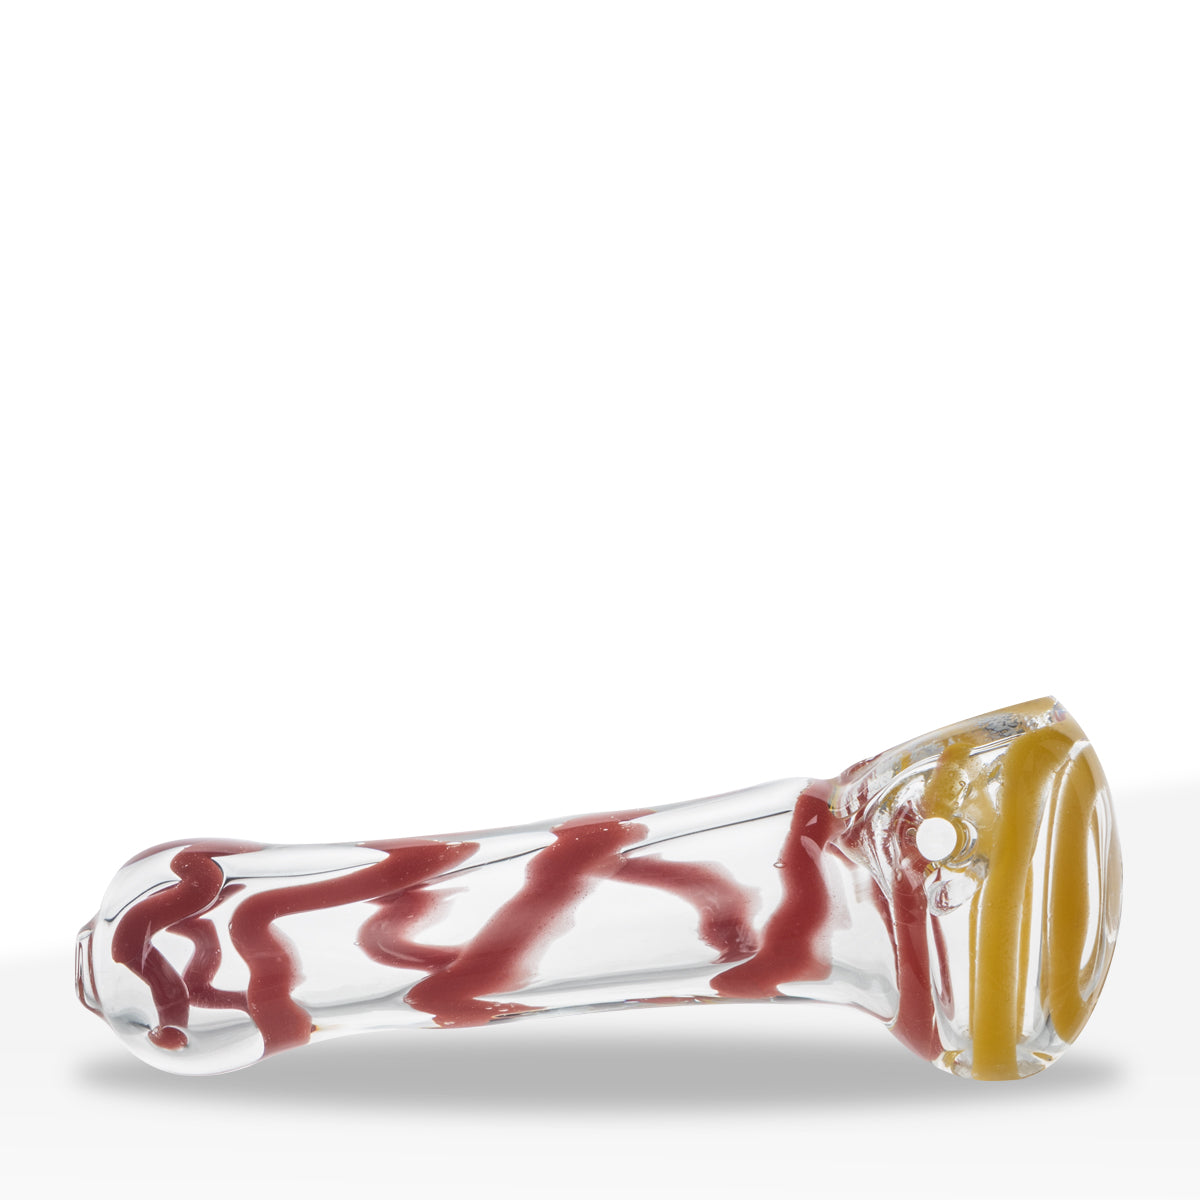 Hand Pipe | Classic Glass Spoon Thick Candy Cane Hand Pipe | 4" - Glass - Assorted Colors